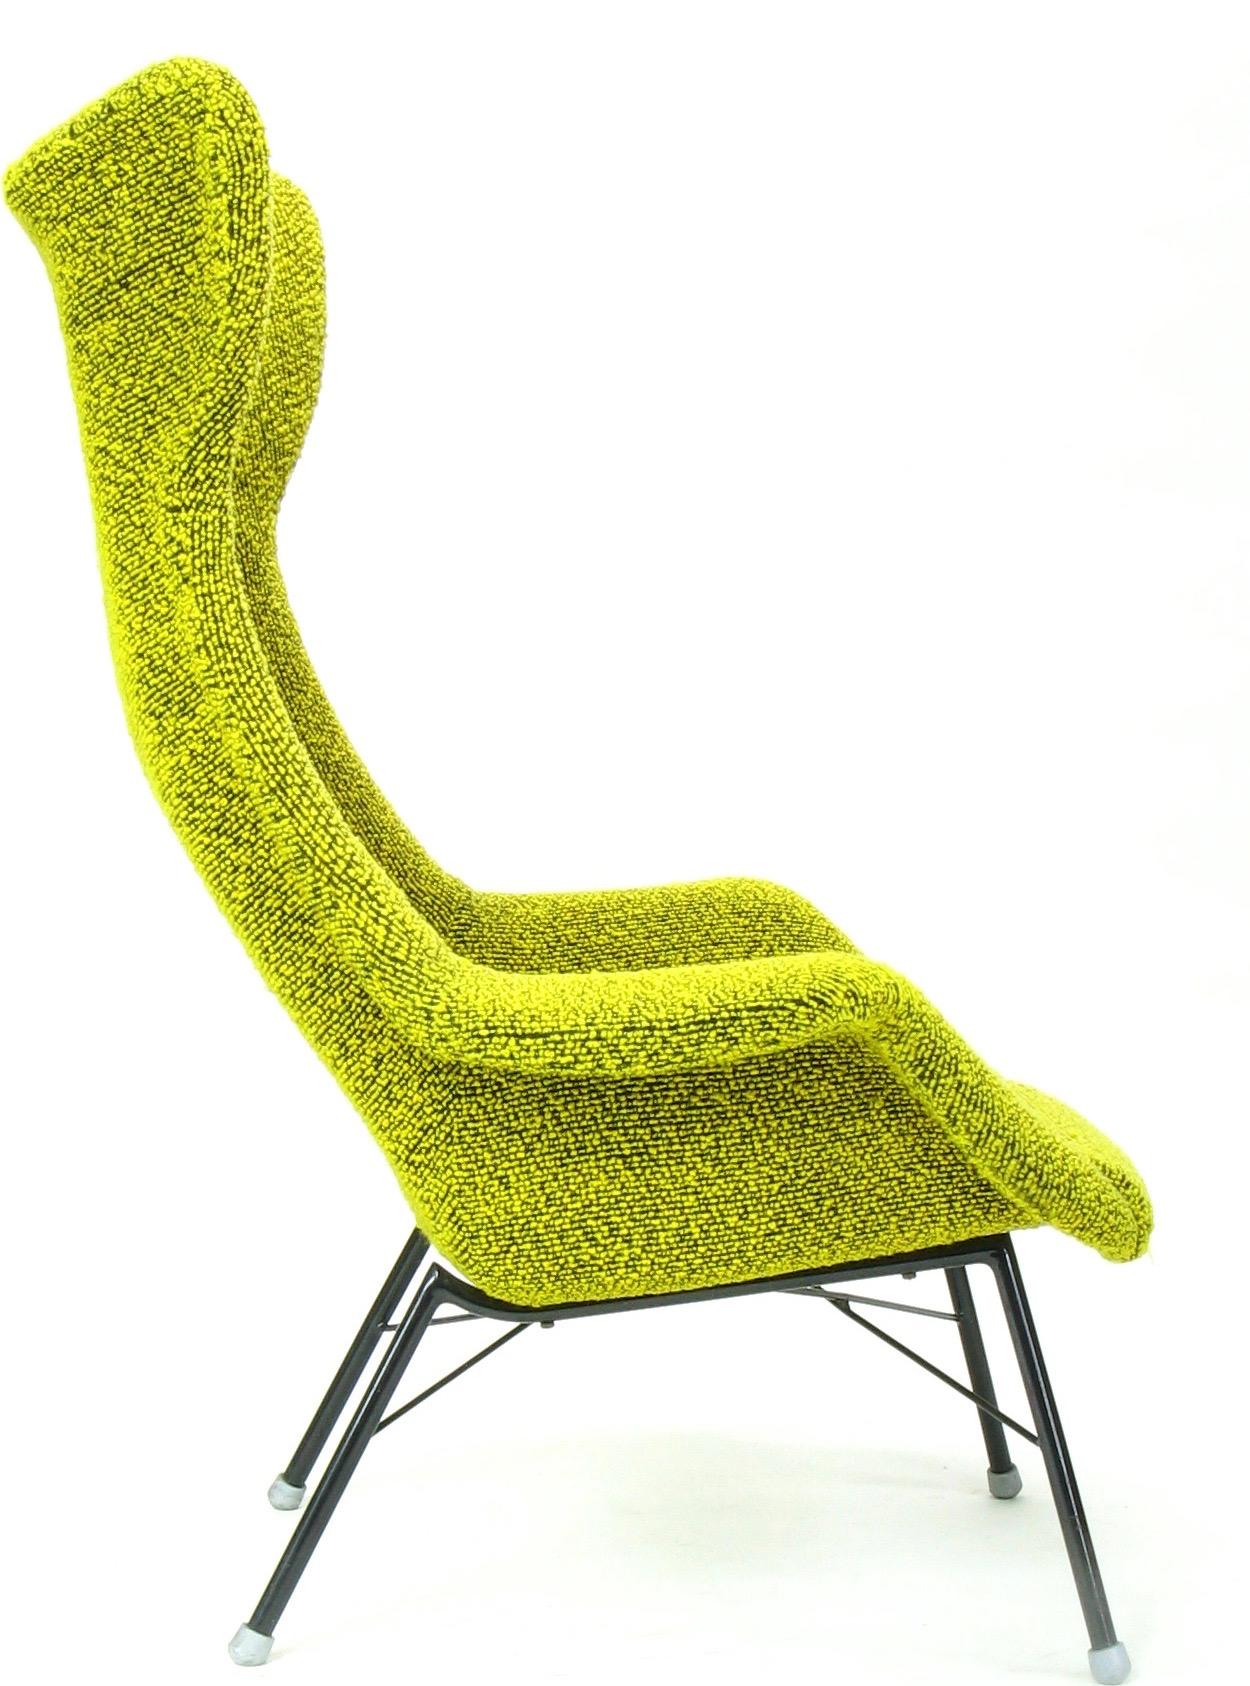 Mid-Century Modern Yellow and Green Wingback Armchair by Miroslav Navratil for Ton, 1960s For Sale